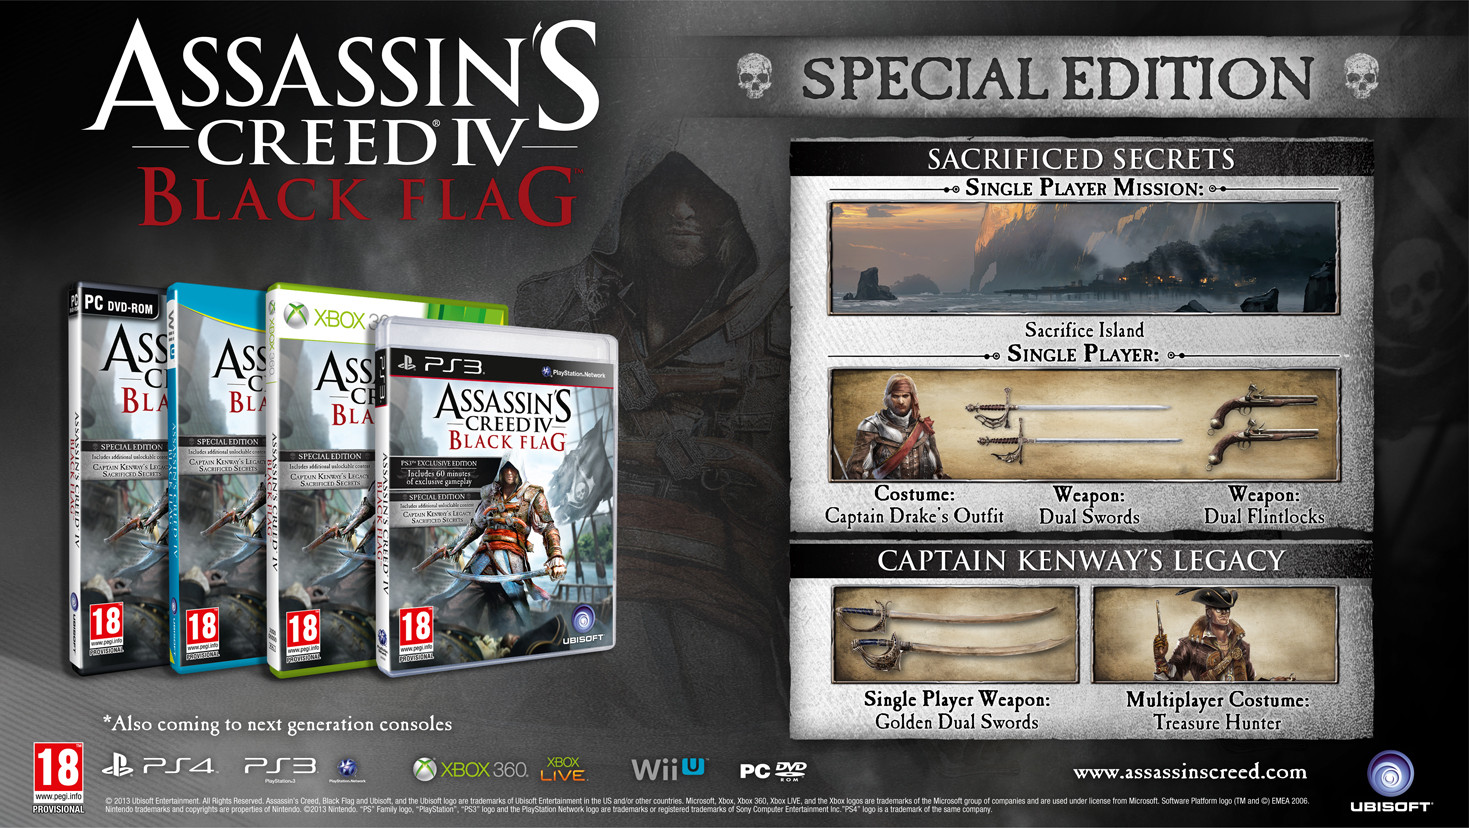 http://images4.wikia.nocookie.net/__cb20130325230440/assassinscreed/images/8/81/Special_edition.jpg